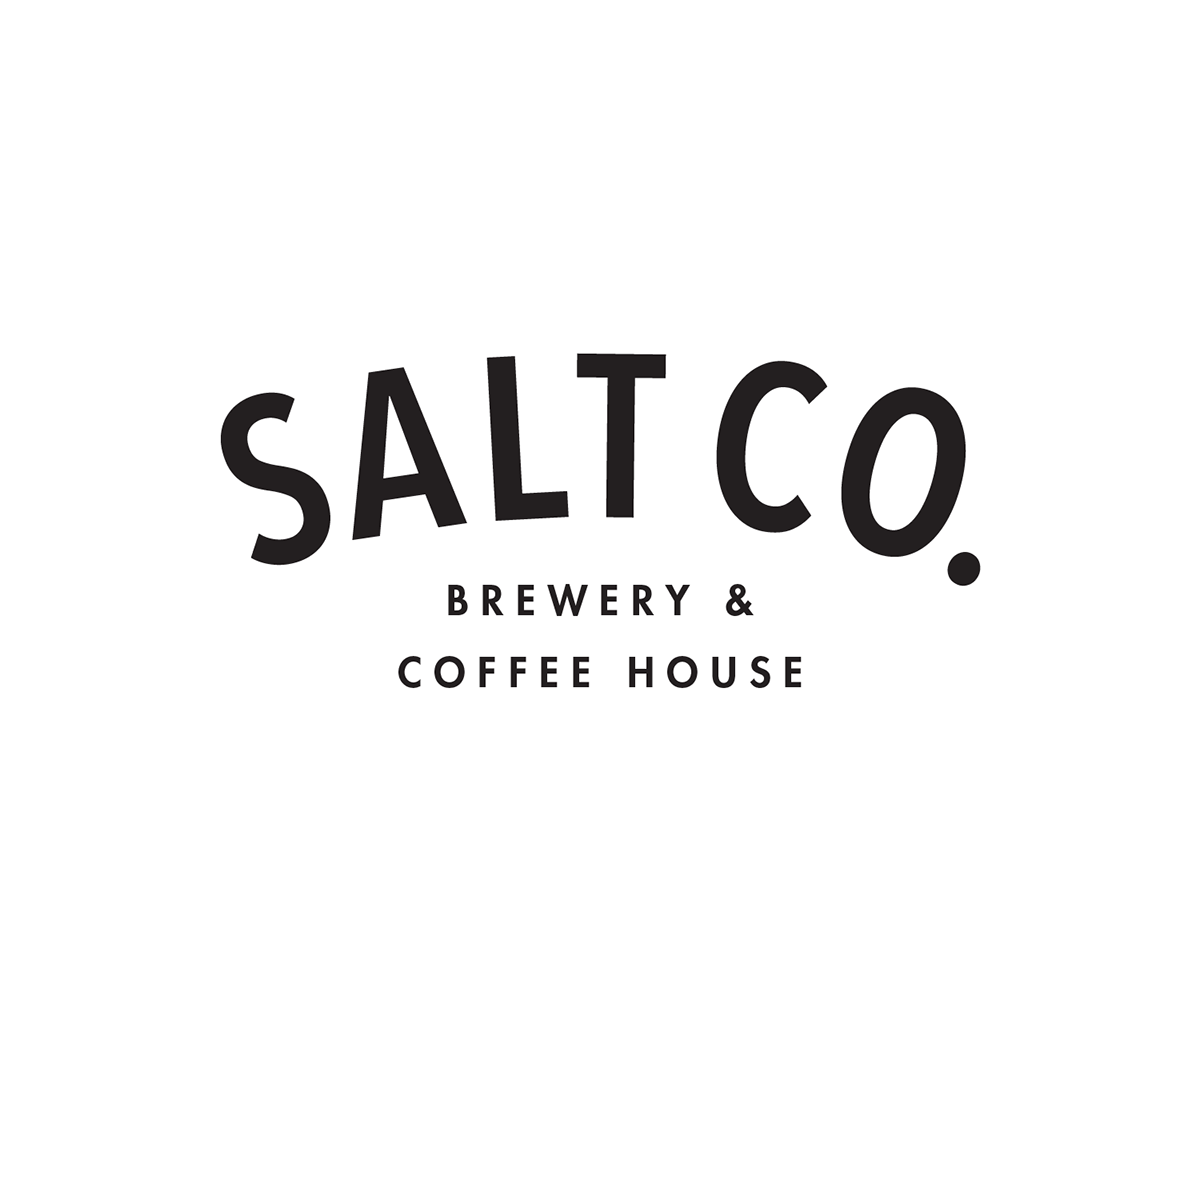 Salt Co surfing subculture process semester Project brands Coffee beer labels black and white